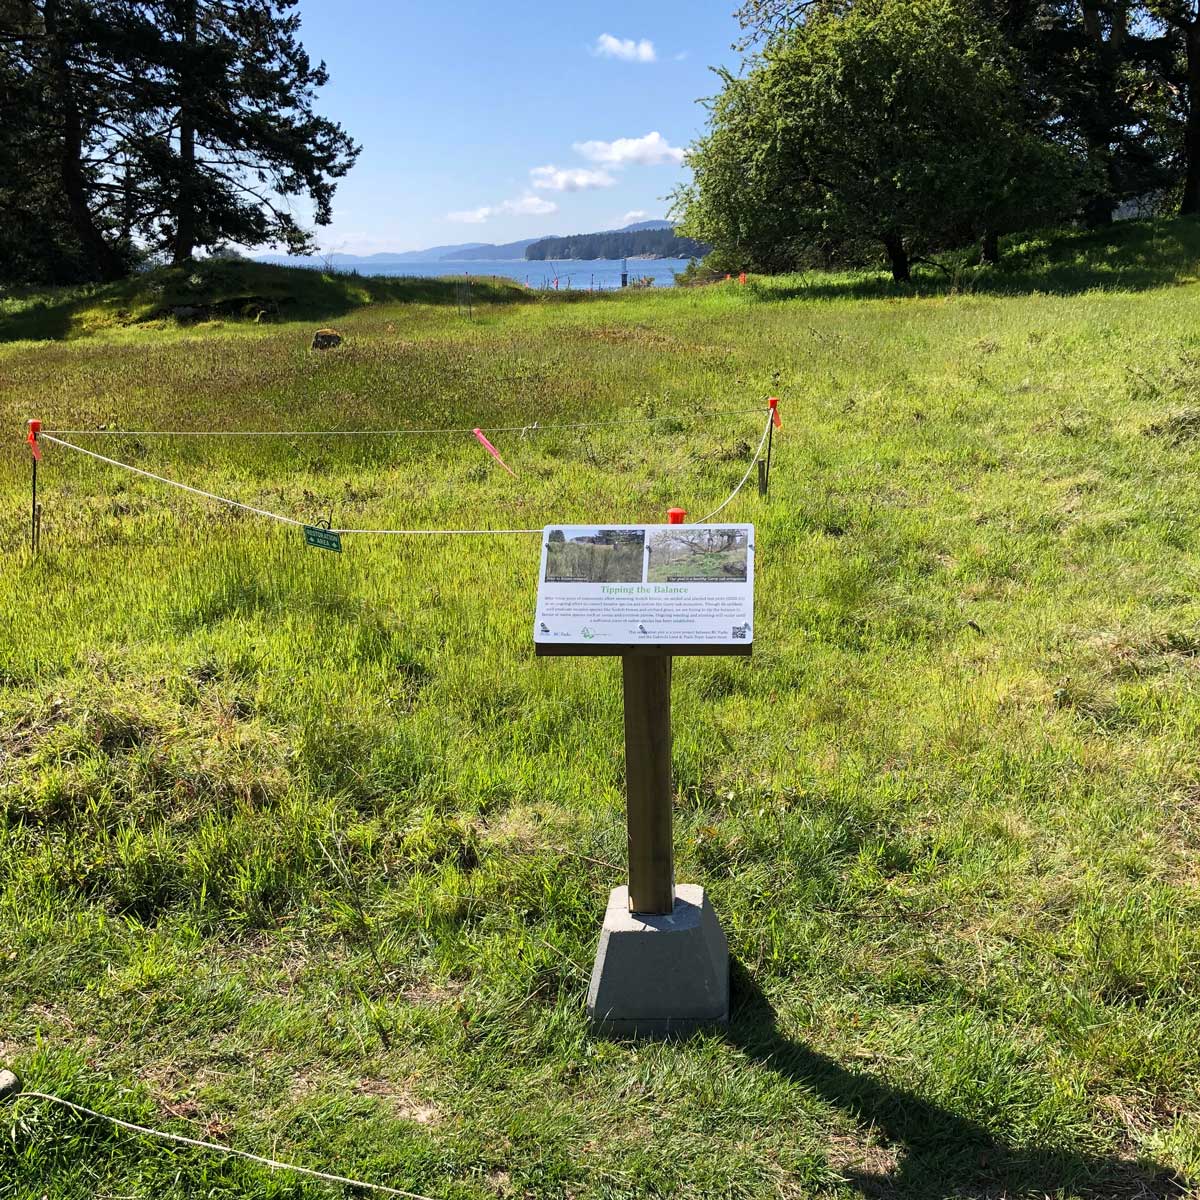 Photograph of a grassy meadow with string barriers and an interpretive sign explaining an ecological restoration project.